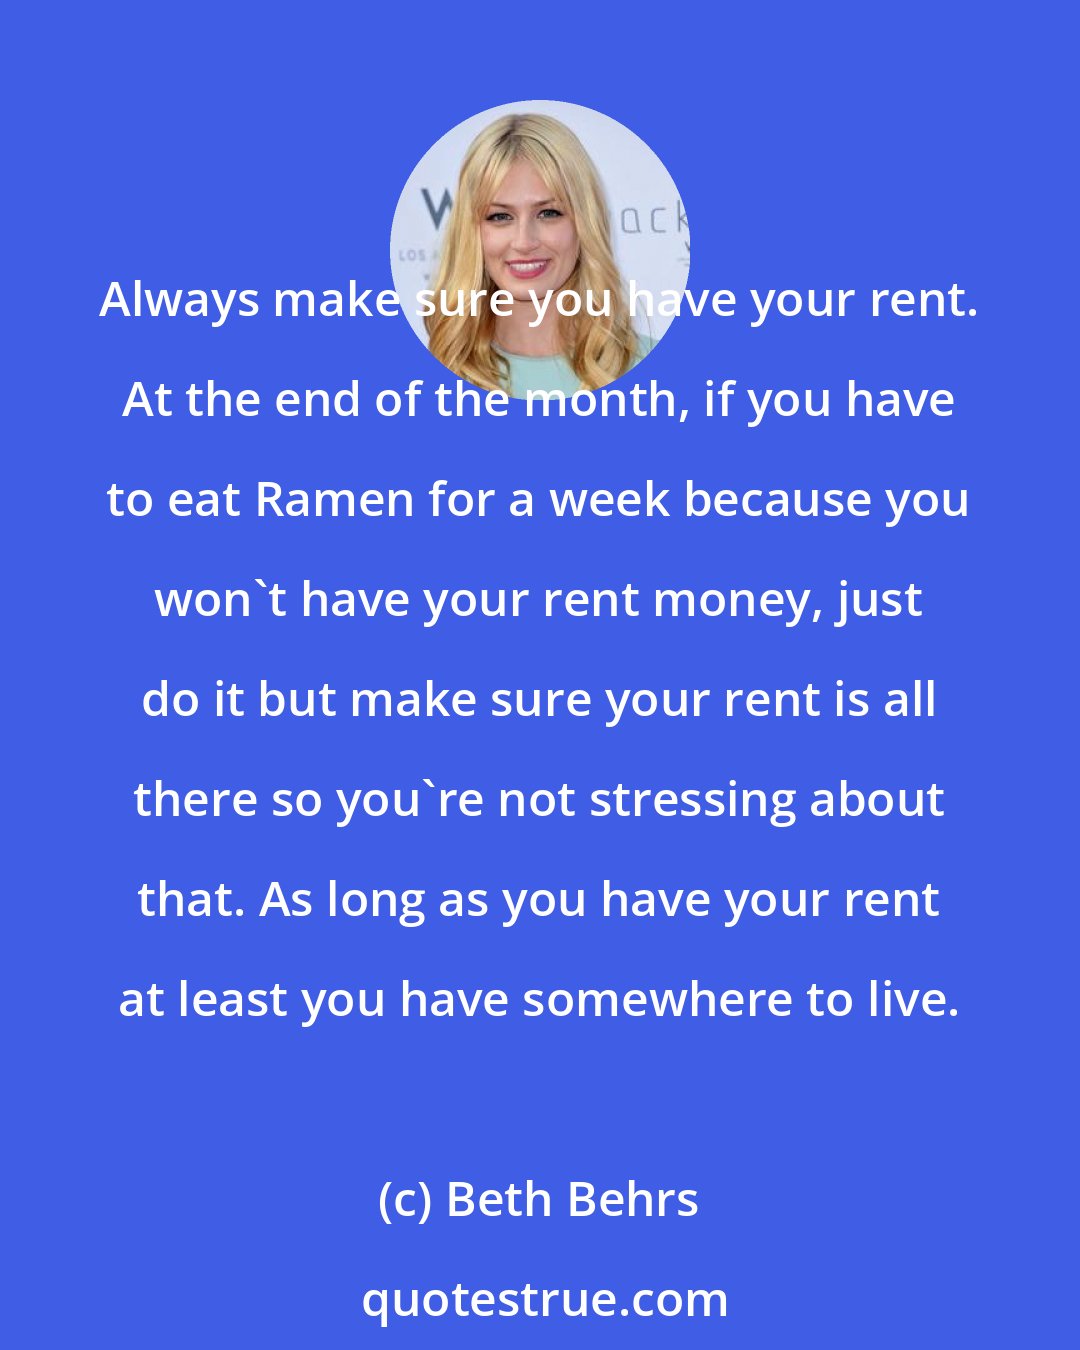 Beth Behrs: Always make sure you have your rent. At the end of the month, if you have to eat Ramen for a week because you won't have your rent money, just do it but make sure your rent is all there so you're not stressing about that. As long as you have your rent at least you have somewhere to live.